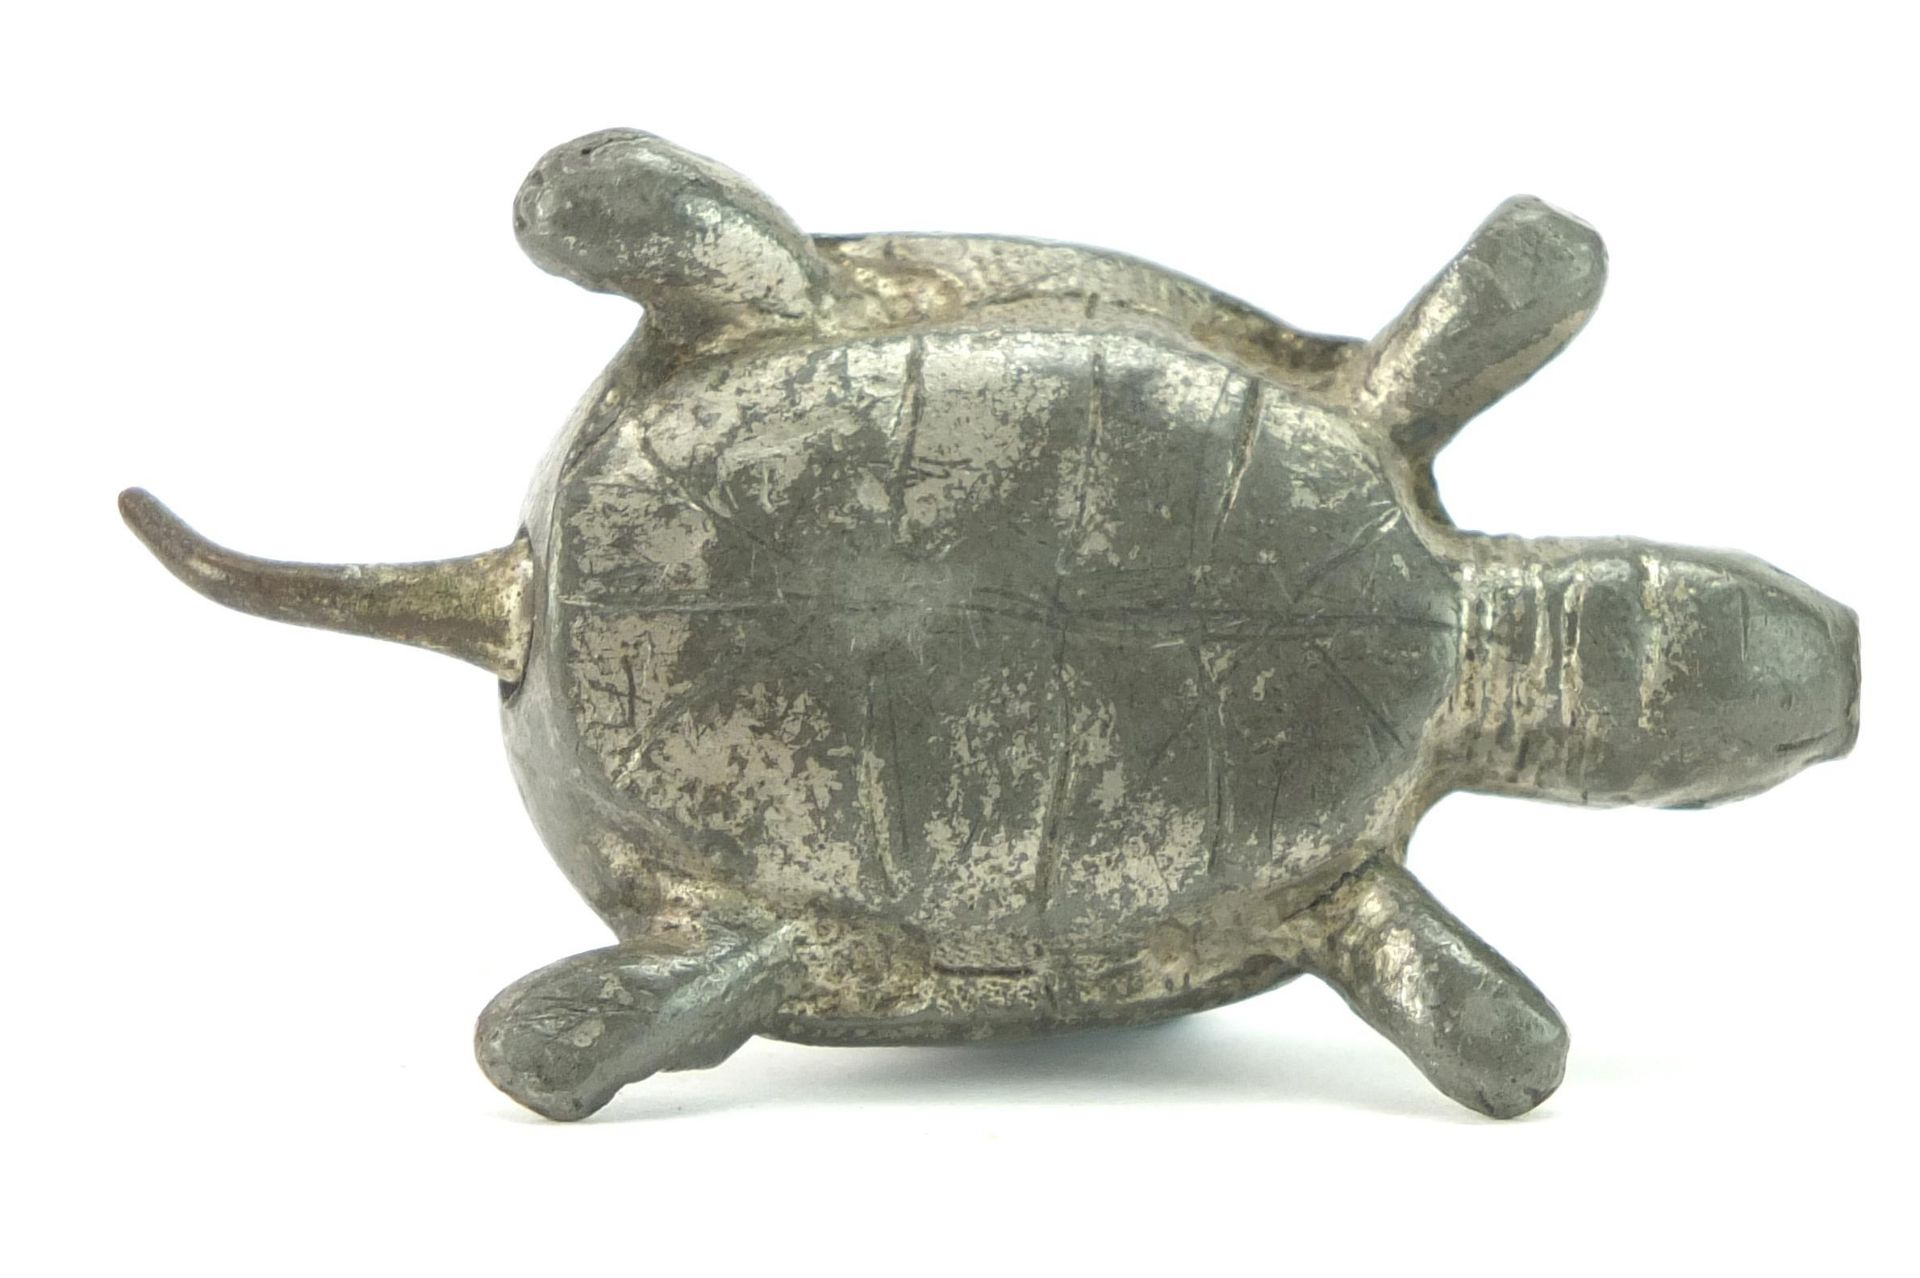 Novelty cast metal propelling pencil in the form of a tortoise, 5.5cm in length - Image 3 of 3